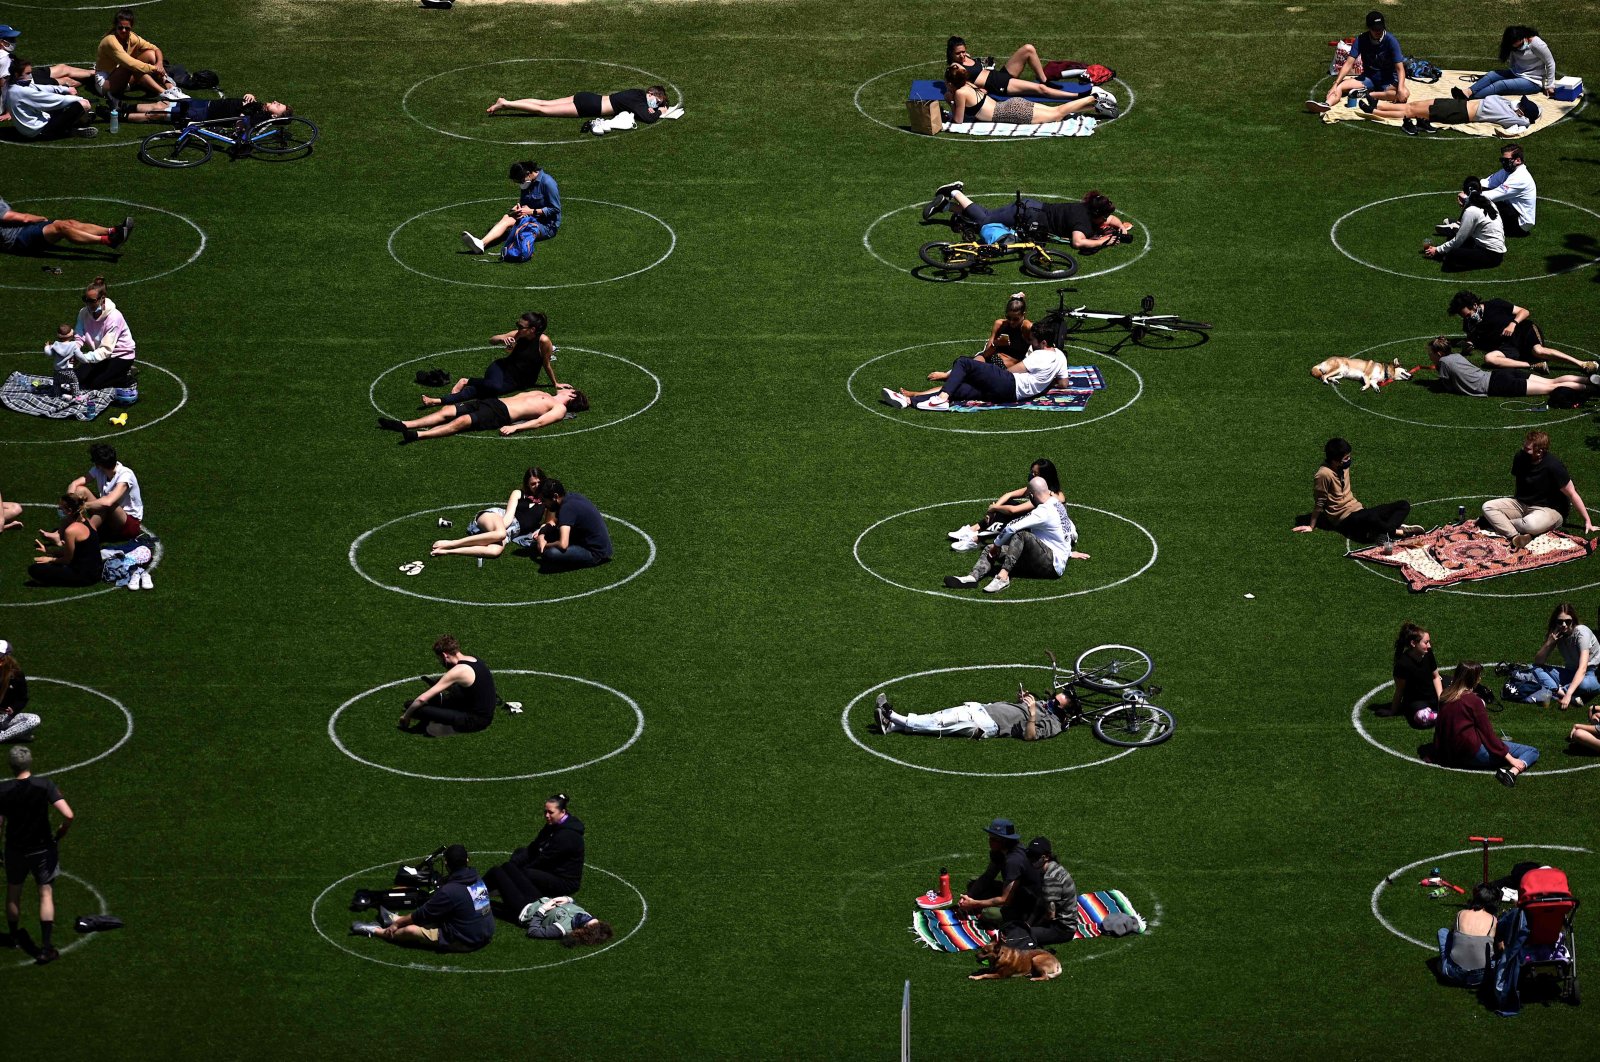 People practice social distancing in white circles in Domino Park during the COVID-19 pandemic, New York City, U.S., May 17, 2020 (AFP Photo)